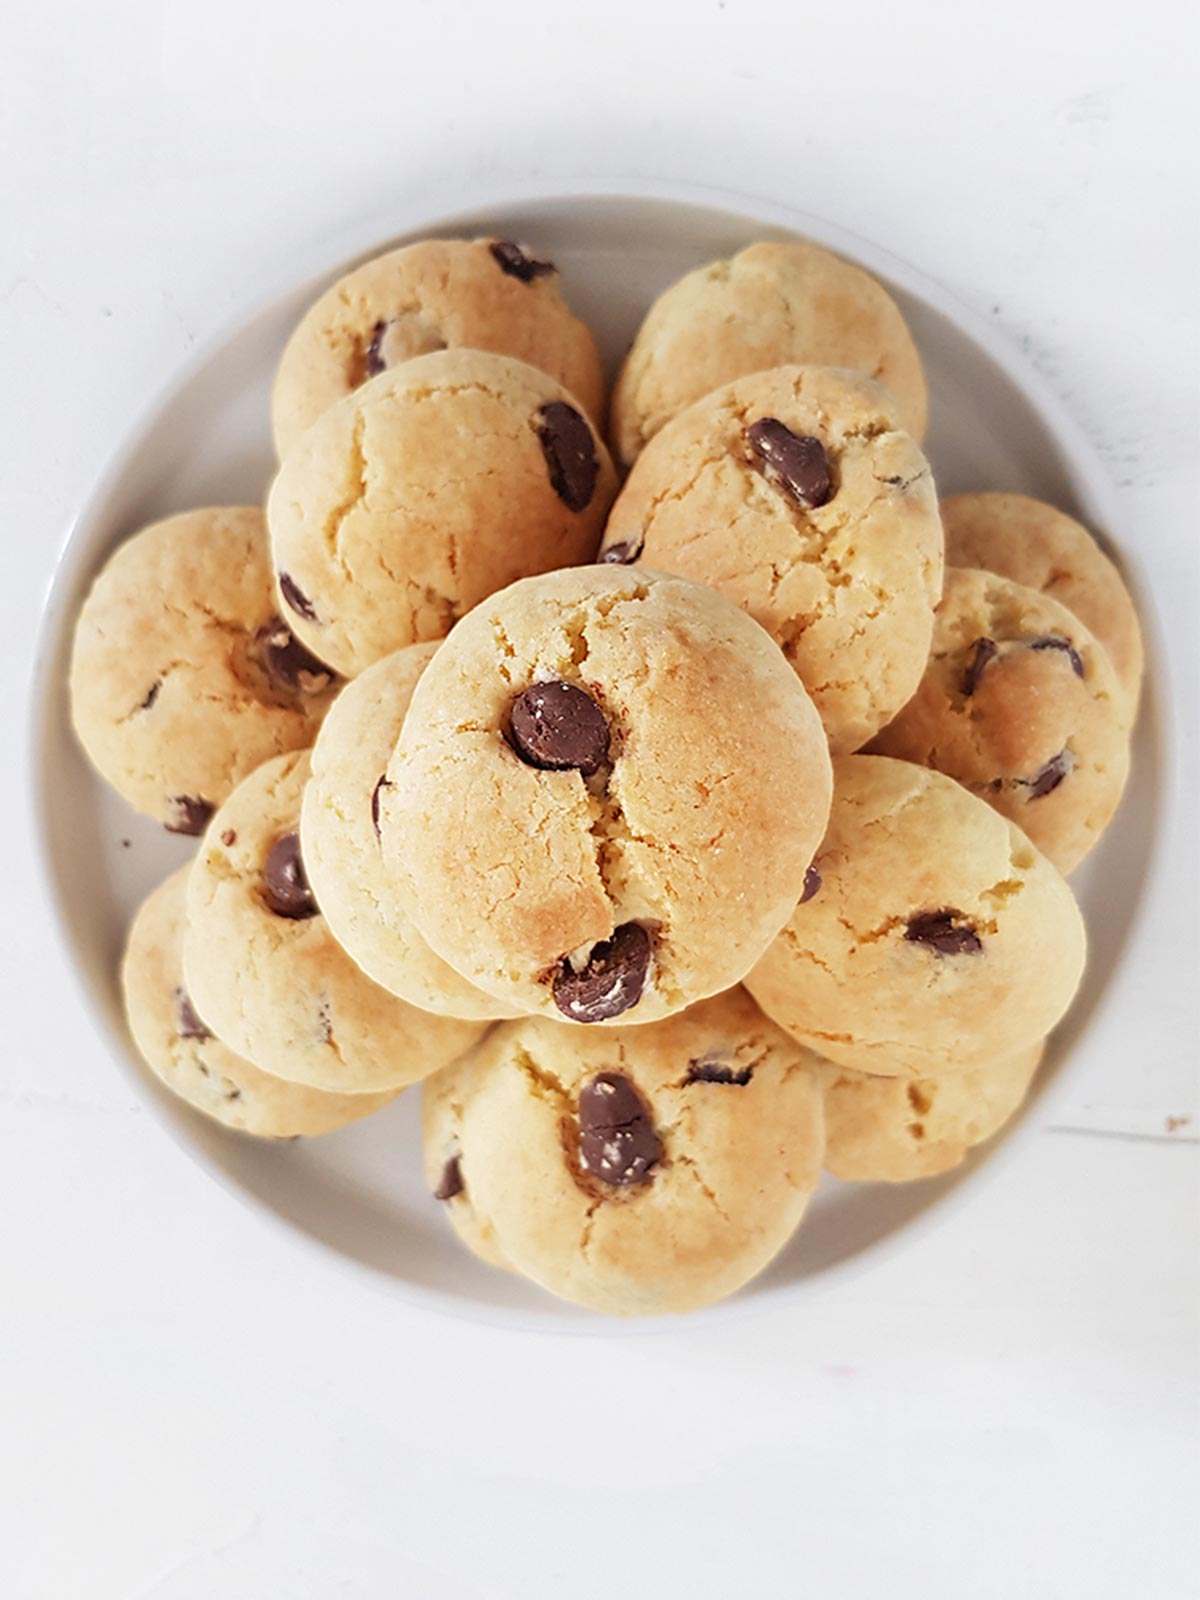 Eggless chocolate chip cookies pile in a plate